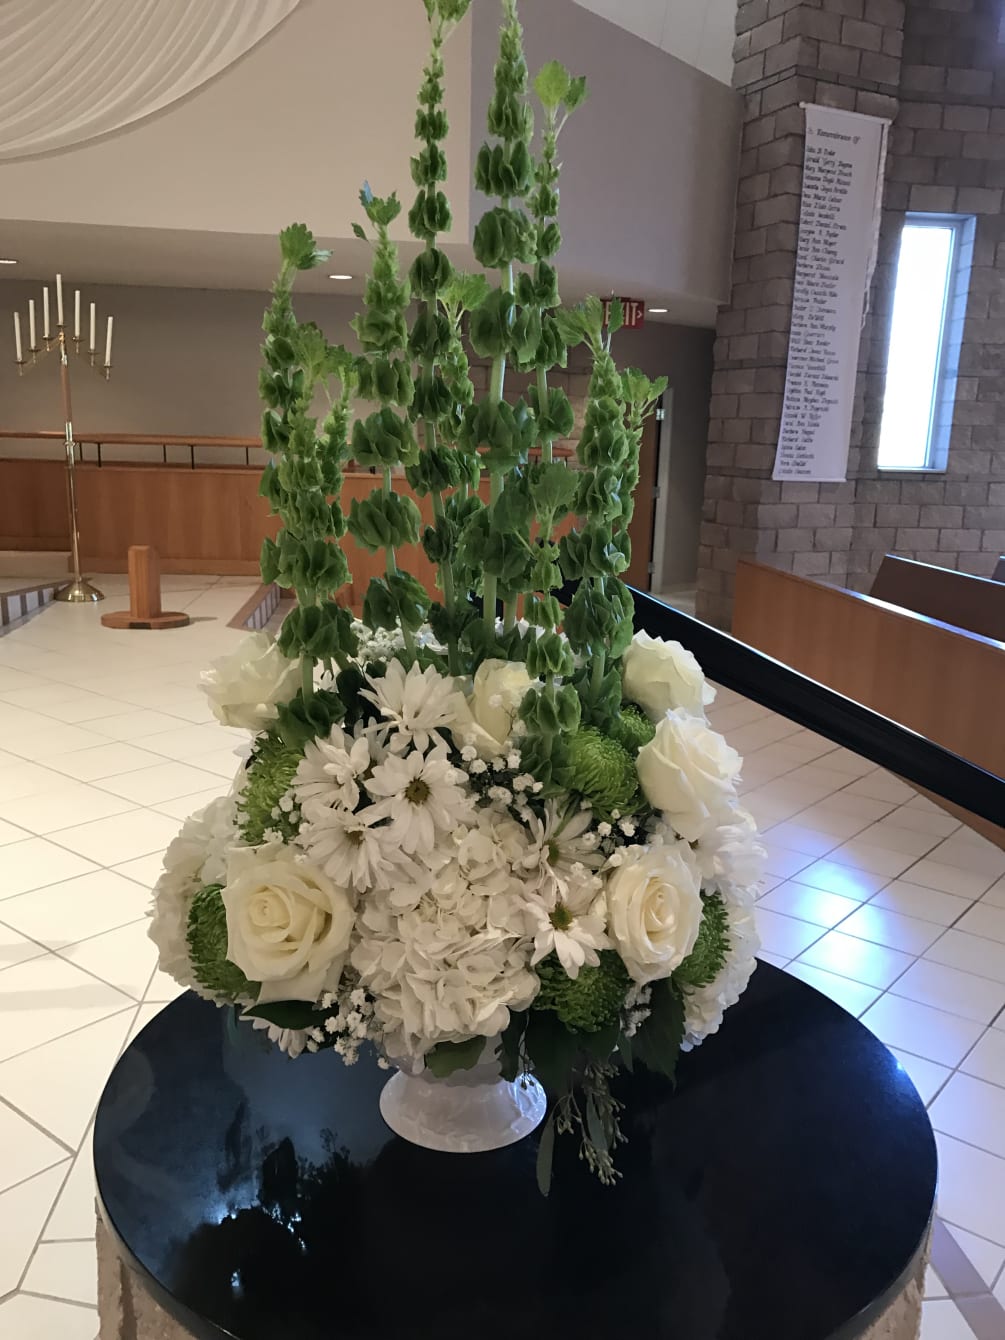 This arrangement is beautiful and used at the wedding ceremony. Bell of